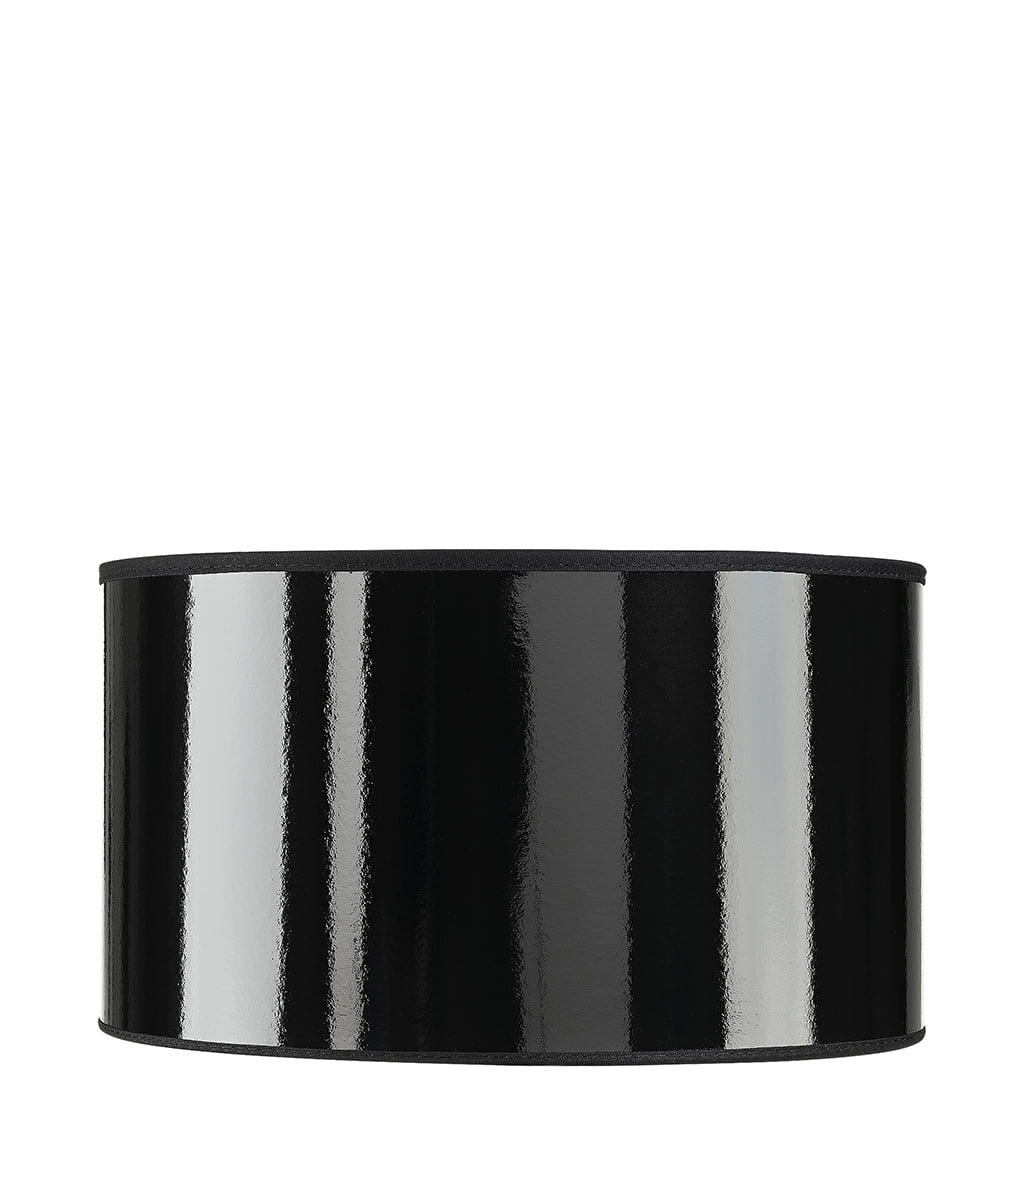 Artwood - Shade Cylinder Black Laquer - Small